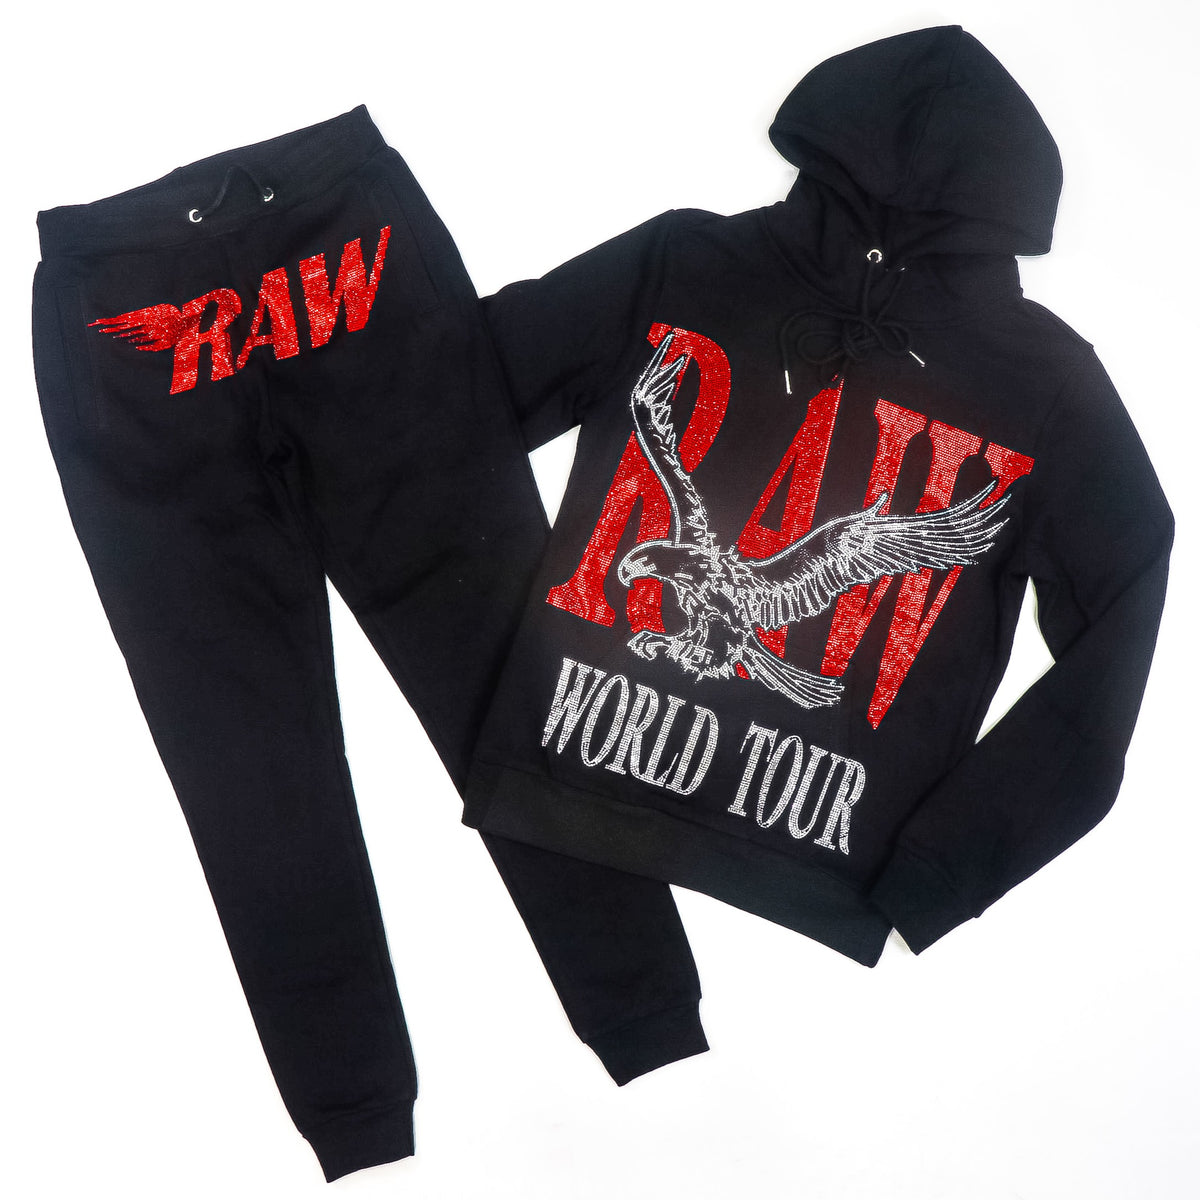 Rawyalty-Raw World Tour Bling Hoodie-Black/Red